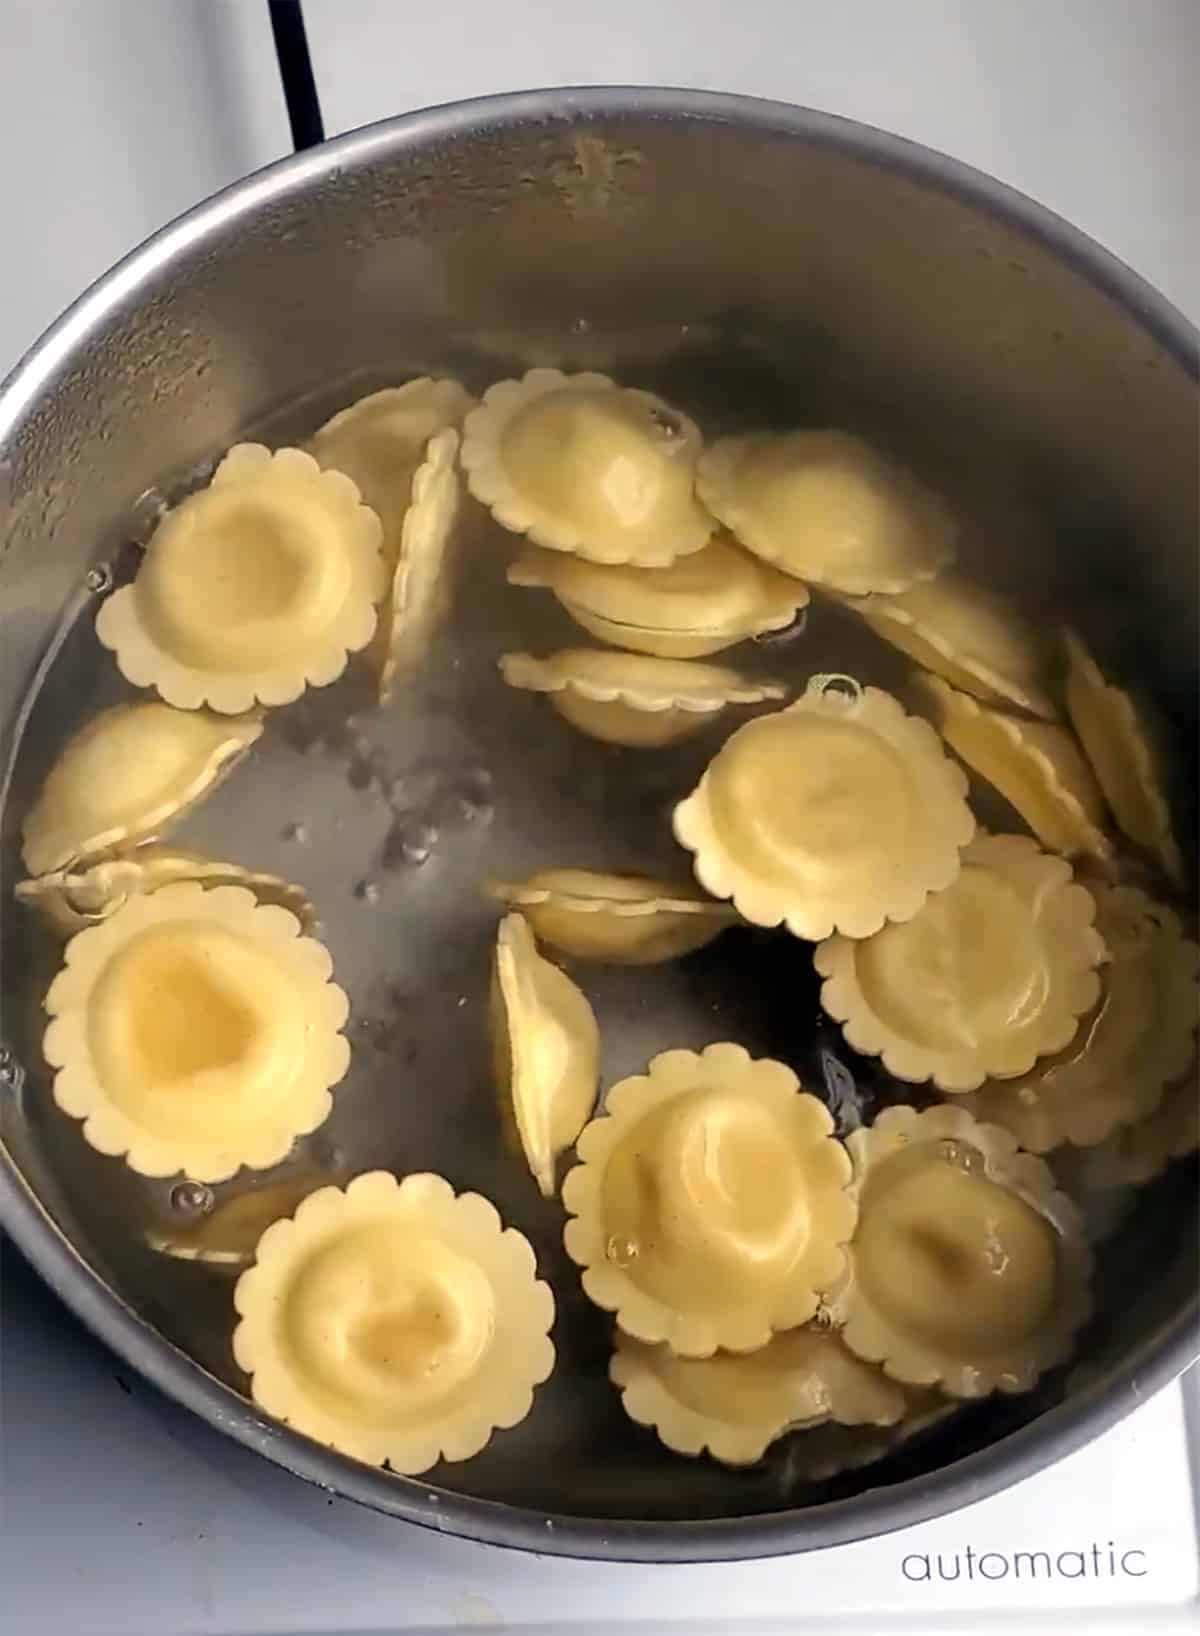 Boil cheese ravioli in pot of boiling water.